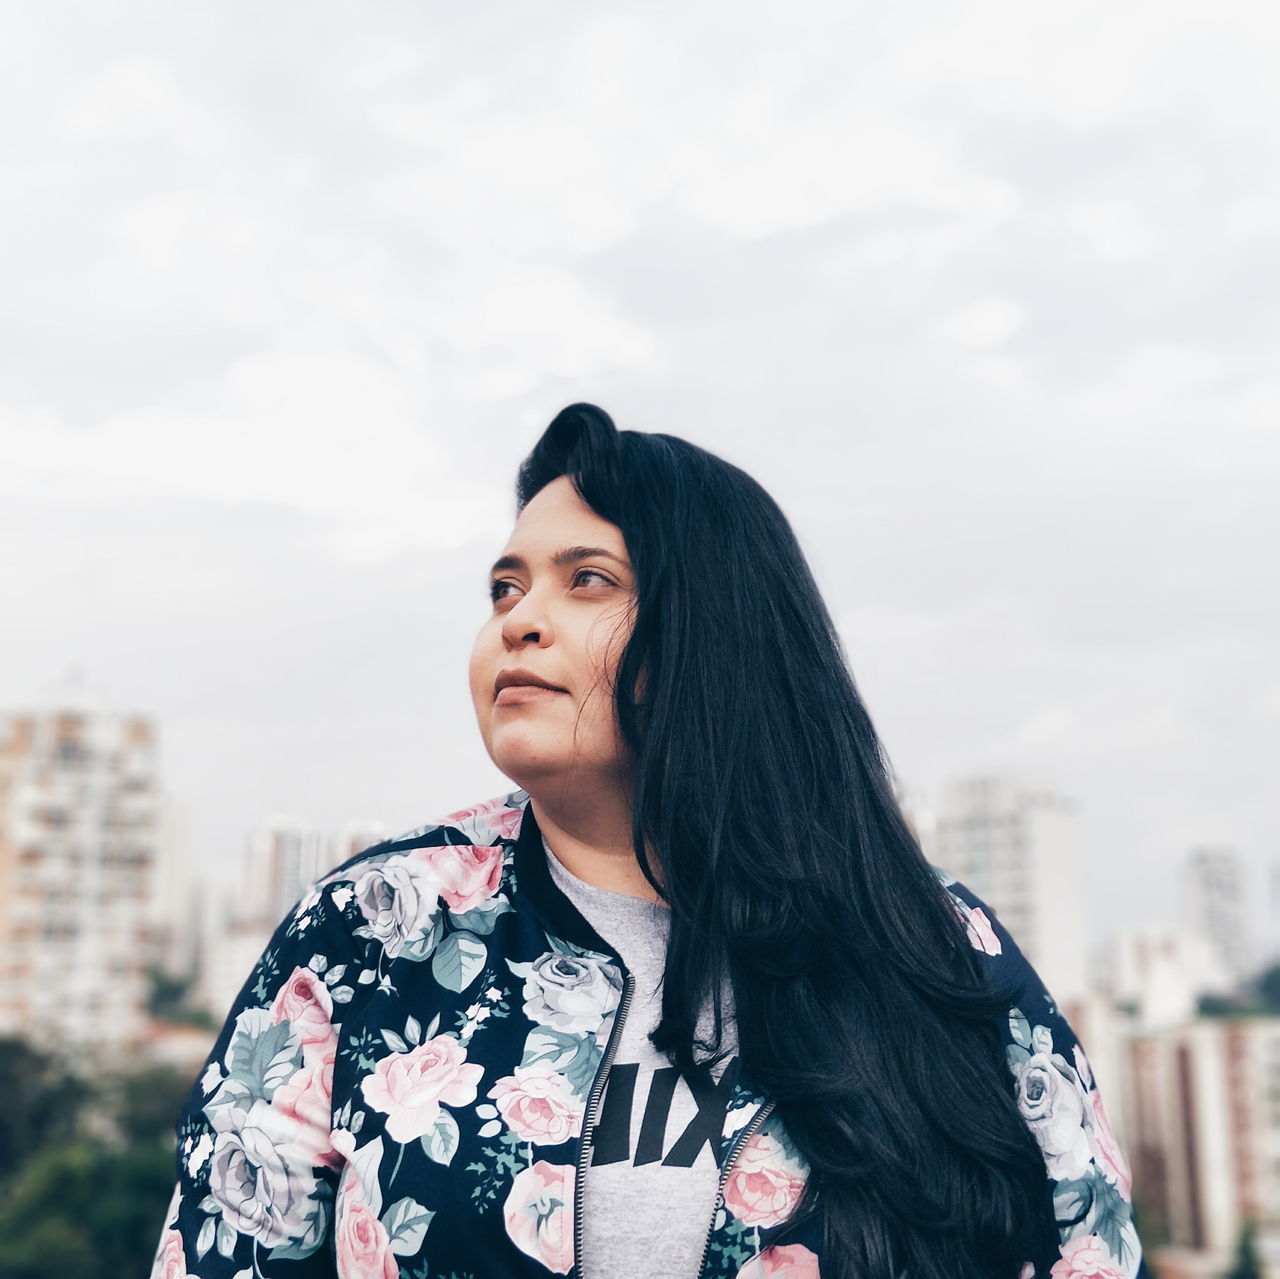 one person, real people, lifestyles, sky, leisure activity, standing, focus on foreground, black hair, building exterior, young adult, architecture, hair, long hair, casual clothing, built structure, looking away, looking, young women, front view, hairstyle, outdoors, beautiful woman, contemplation, floral pattern